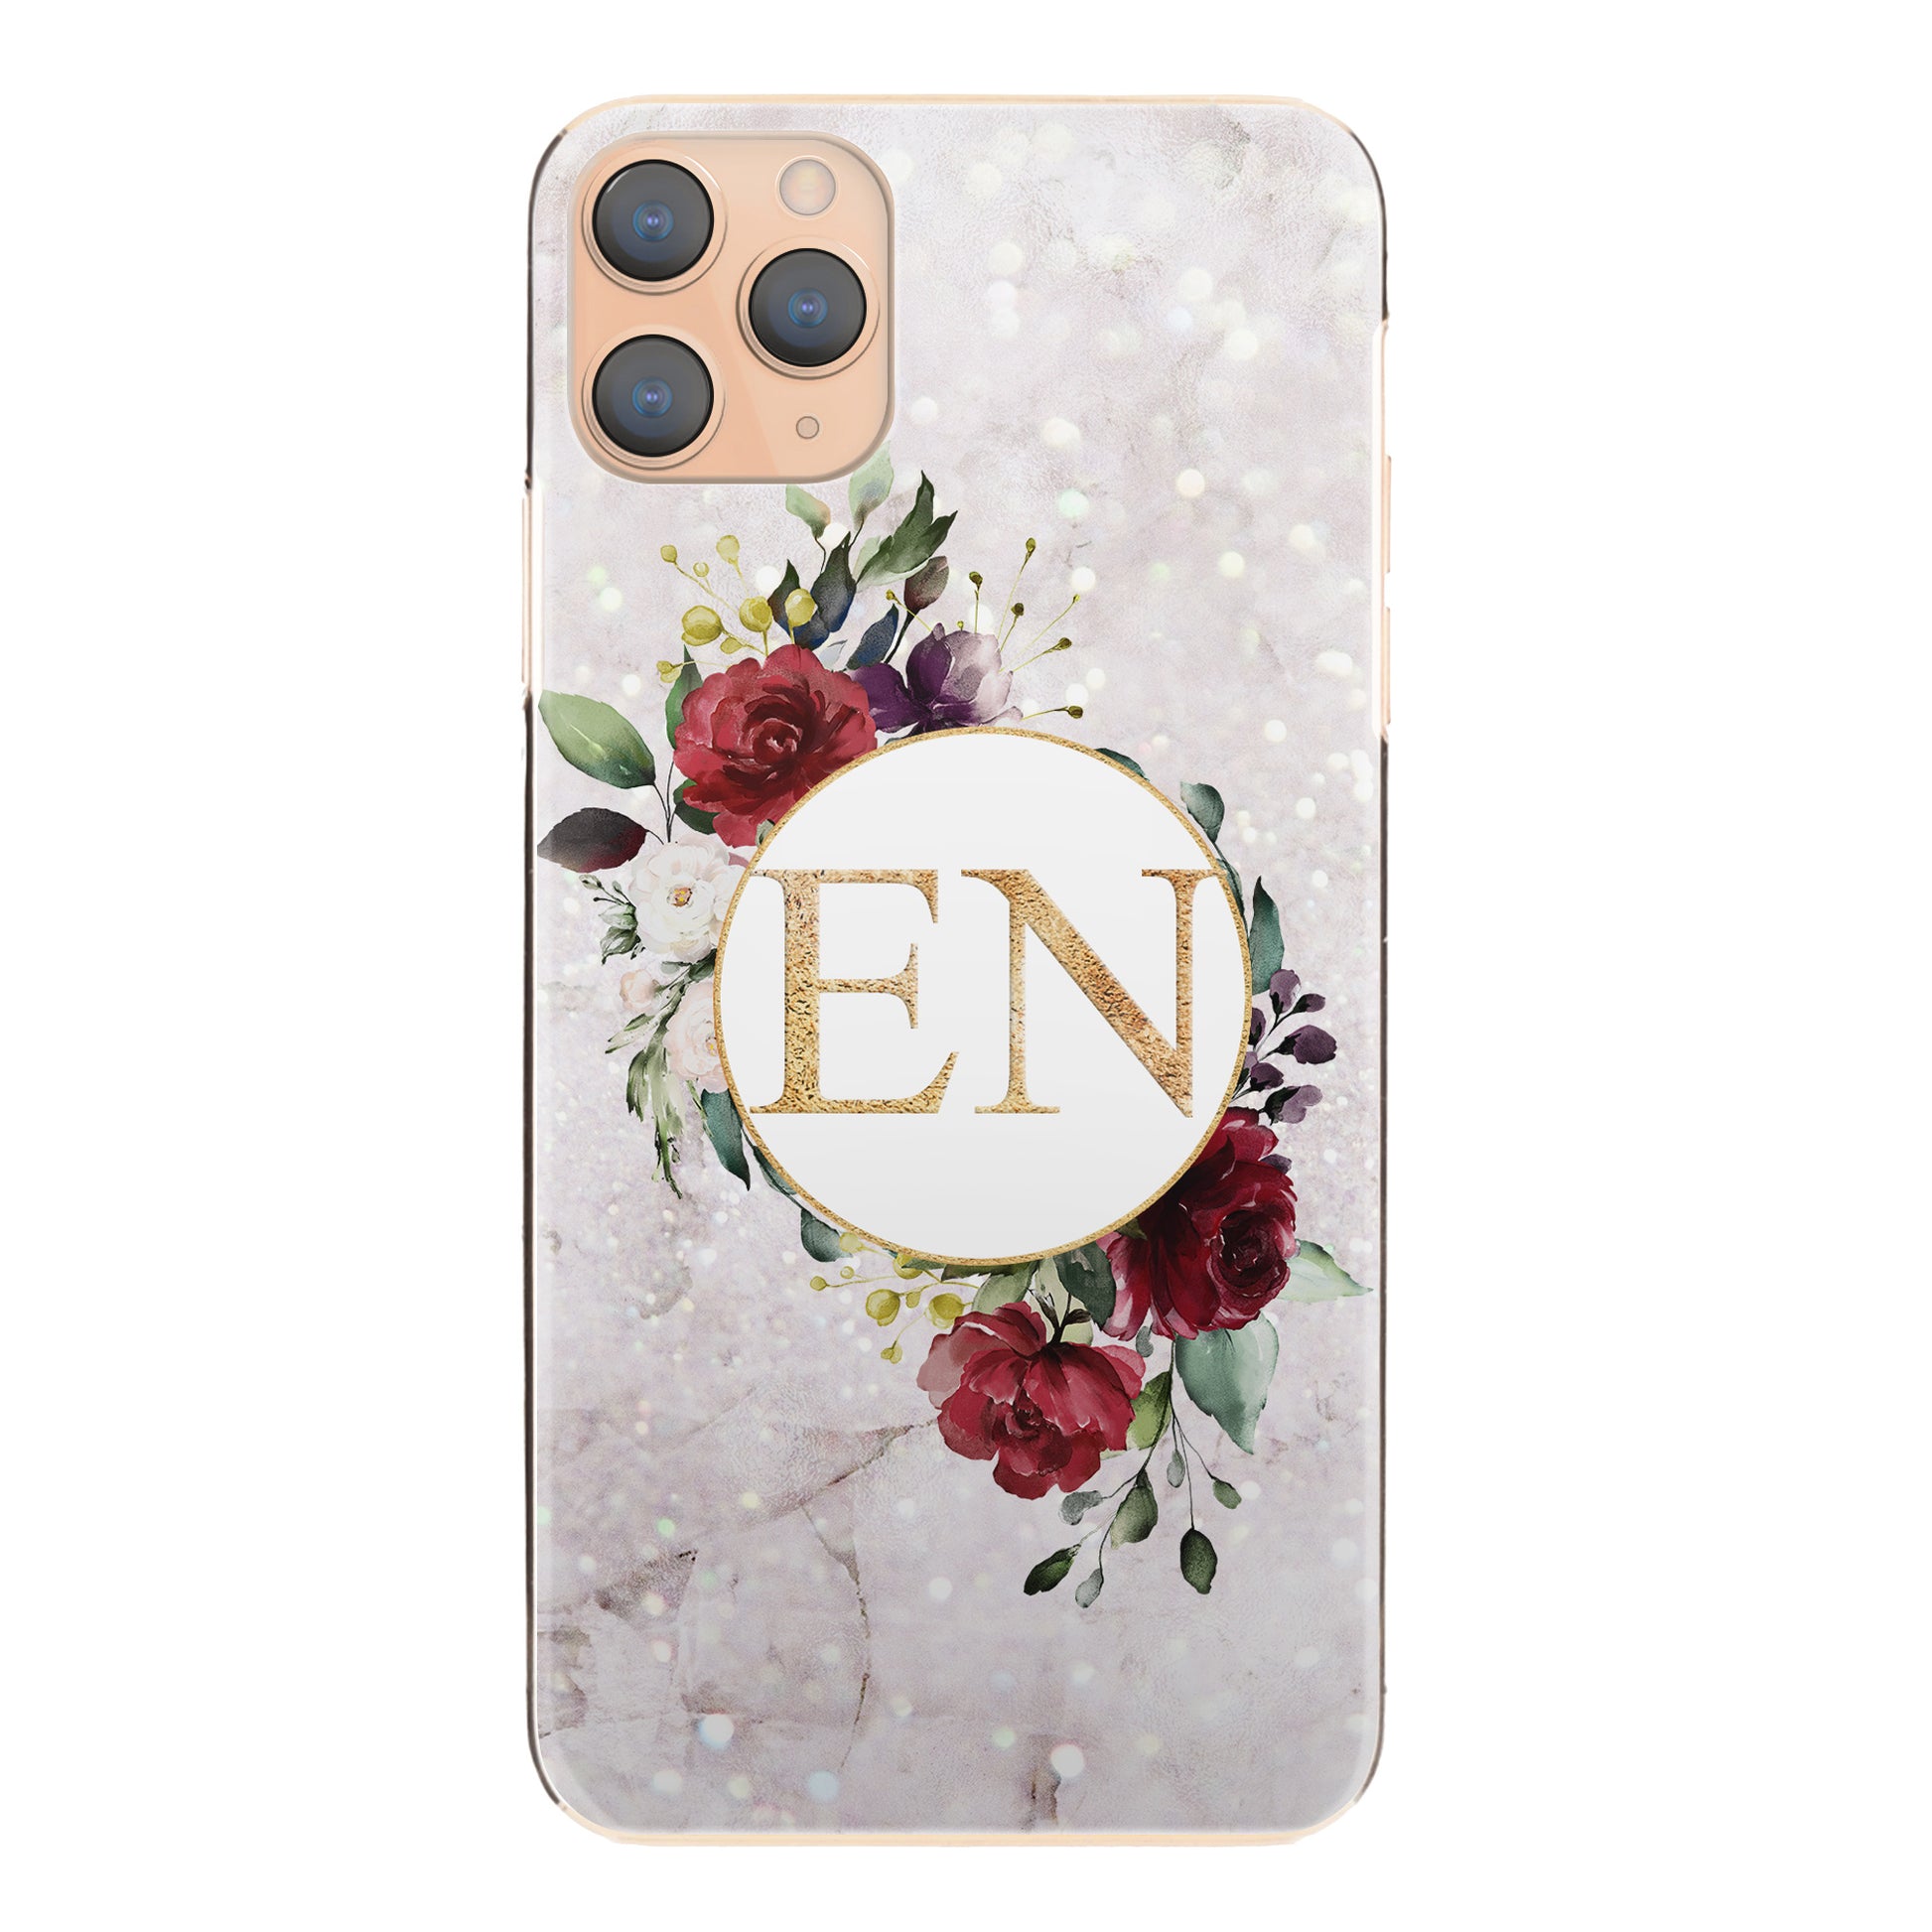 Personalised HTC Phone Hard Case with Floral Gold Initials on Crystal Marble